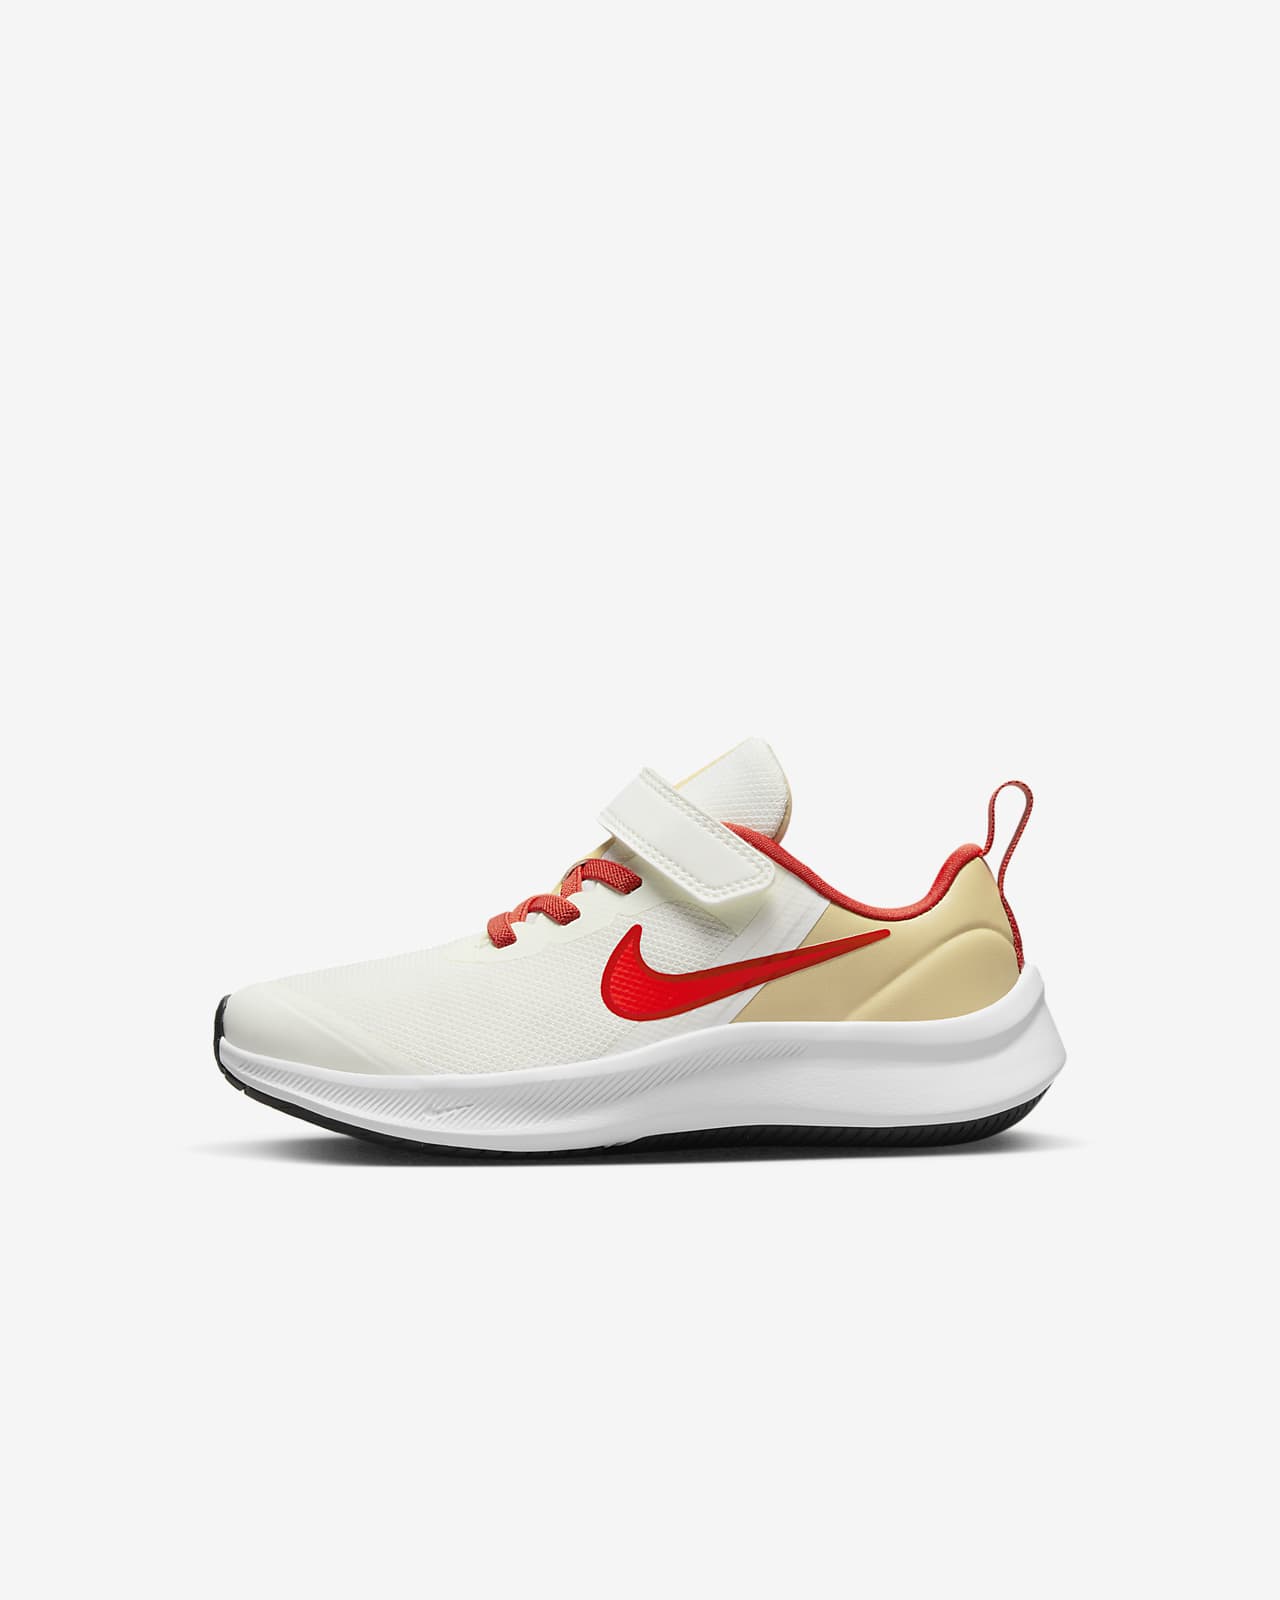 Nike Star Runner 3 Younger Kids' Shoes